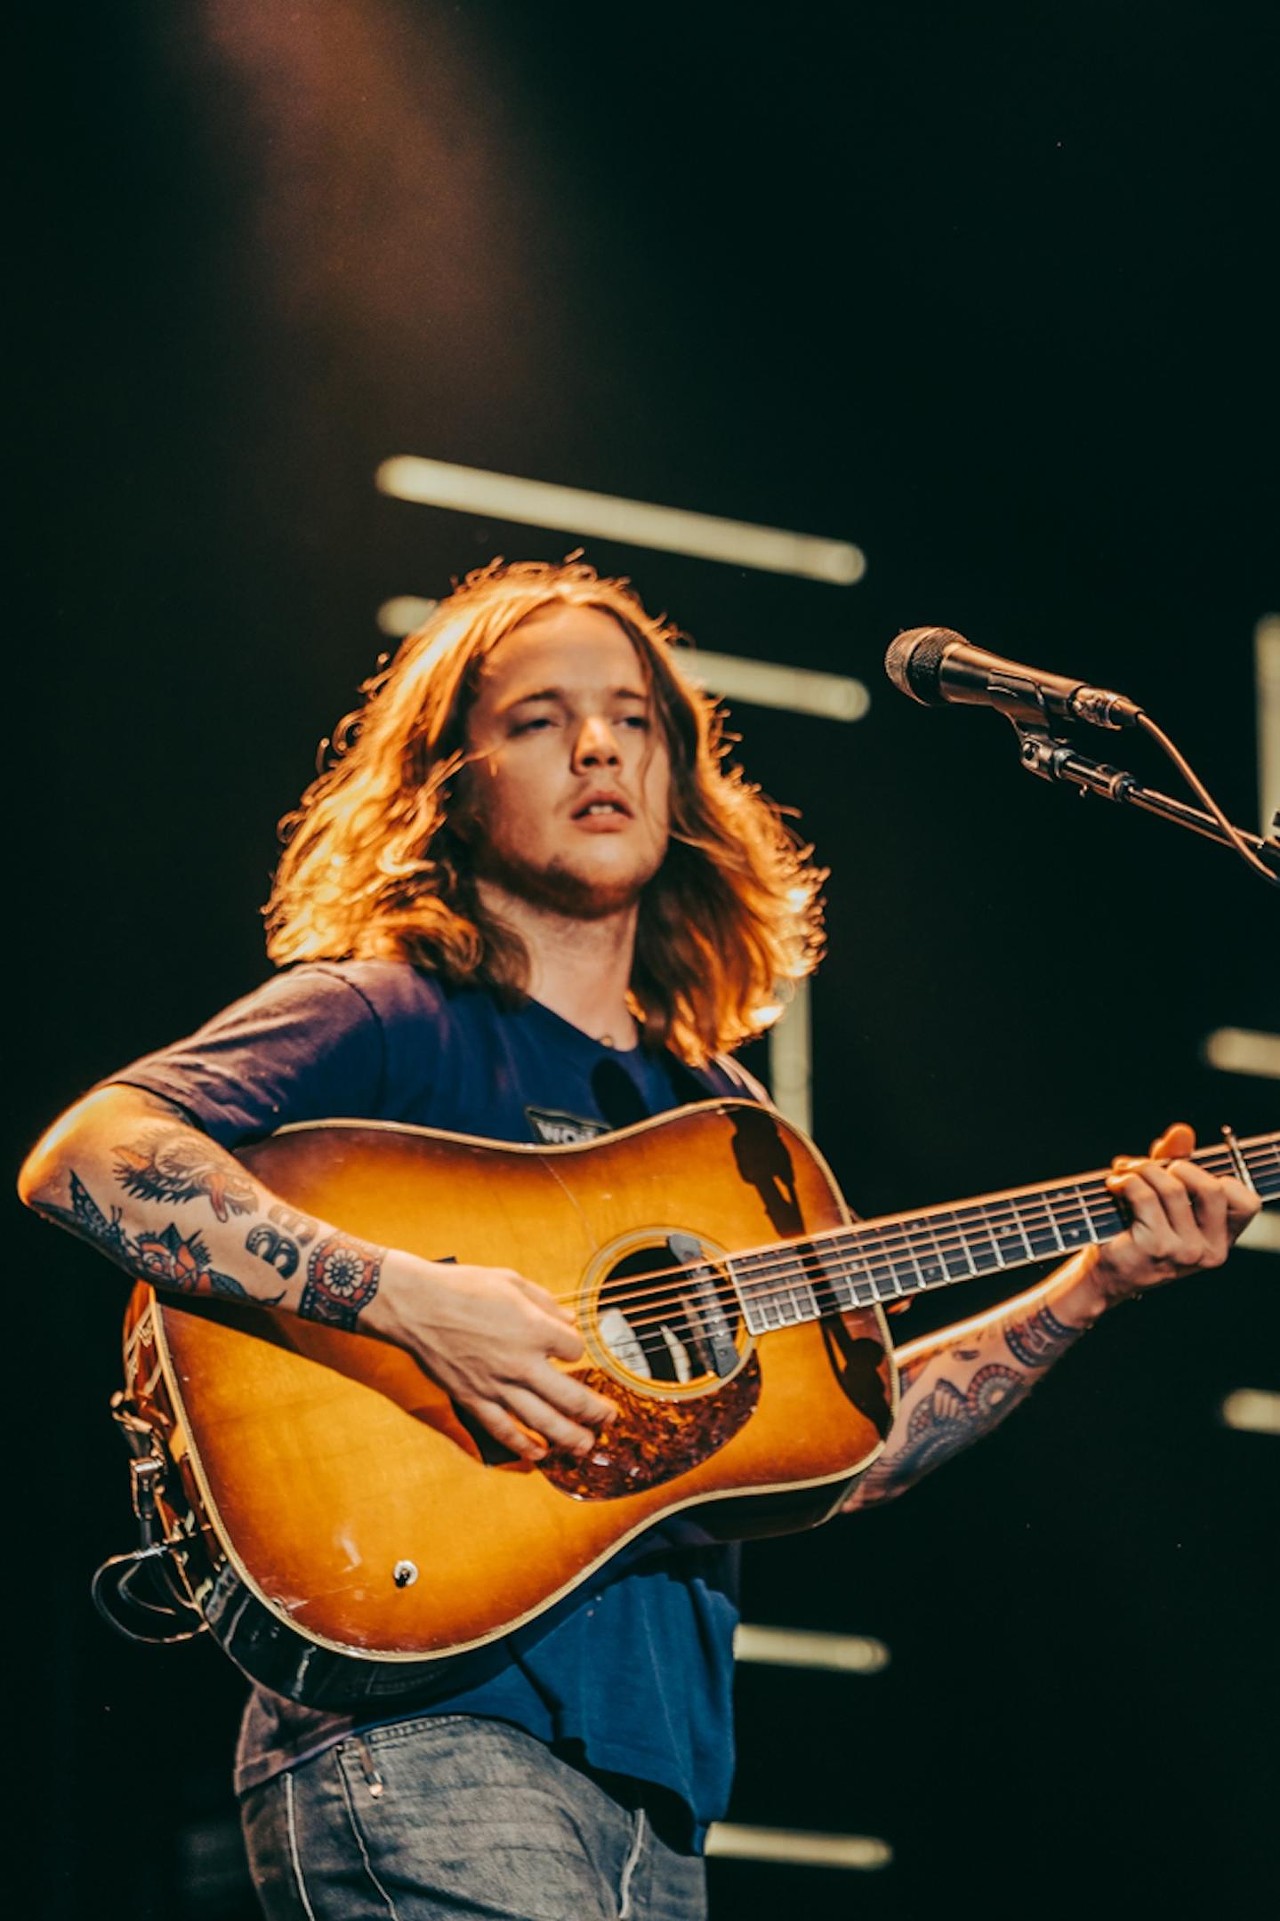 Bluegrass superstar Billy Strings kicks off spring tour with two-night Tampa stand [PHOTOS]